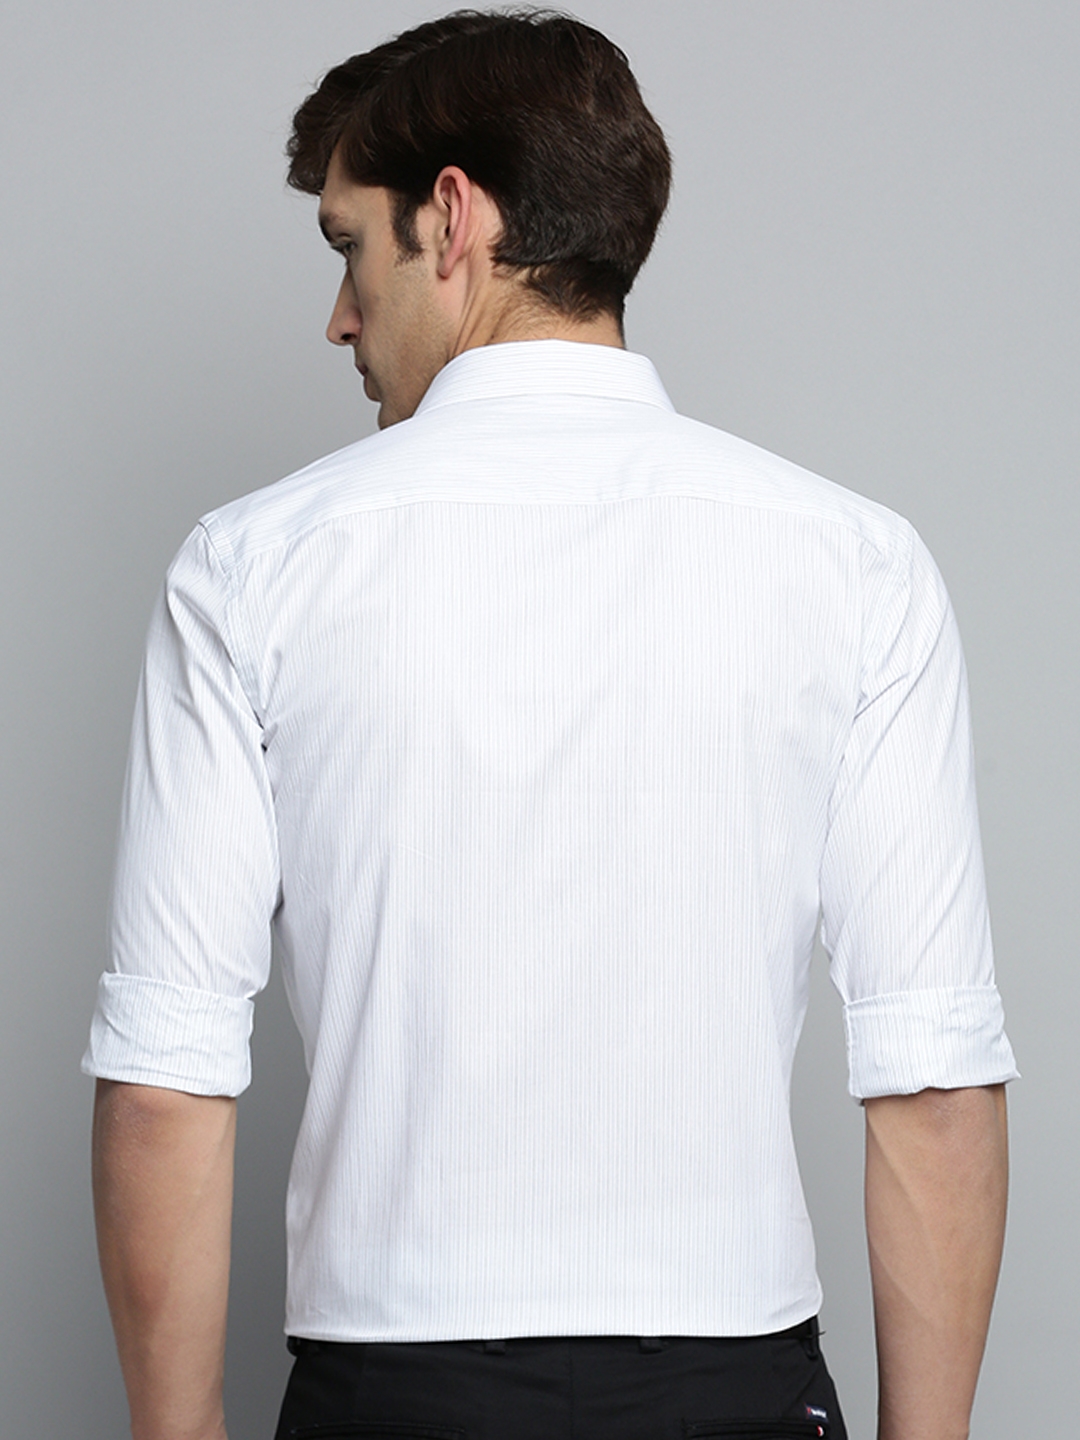 Showoff | SHOWOFF Men's Spread Collar Striped White Classic Shirt 3